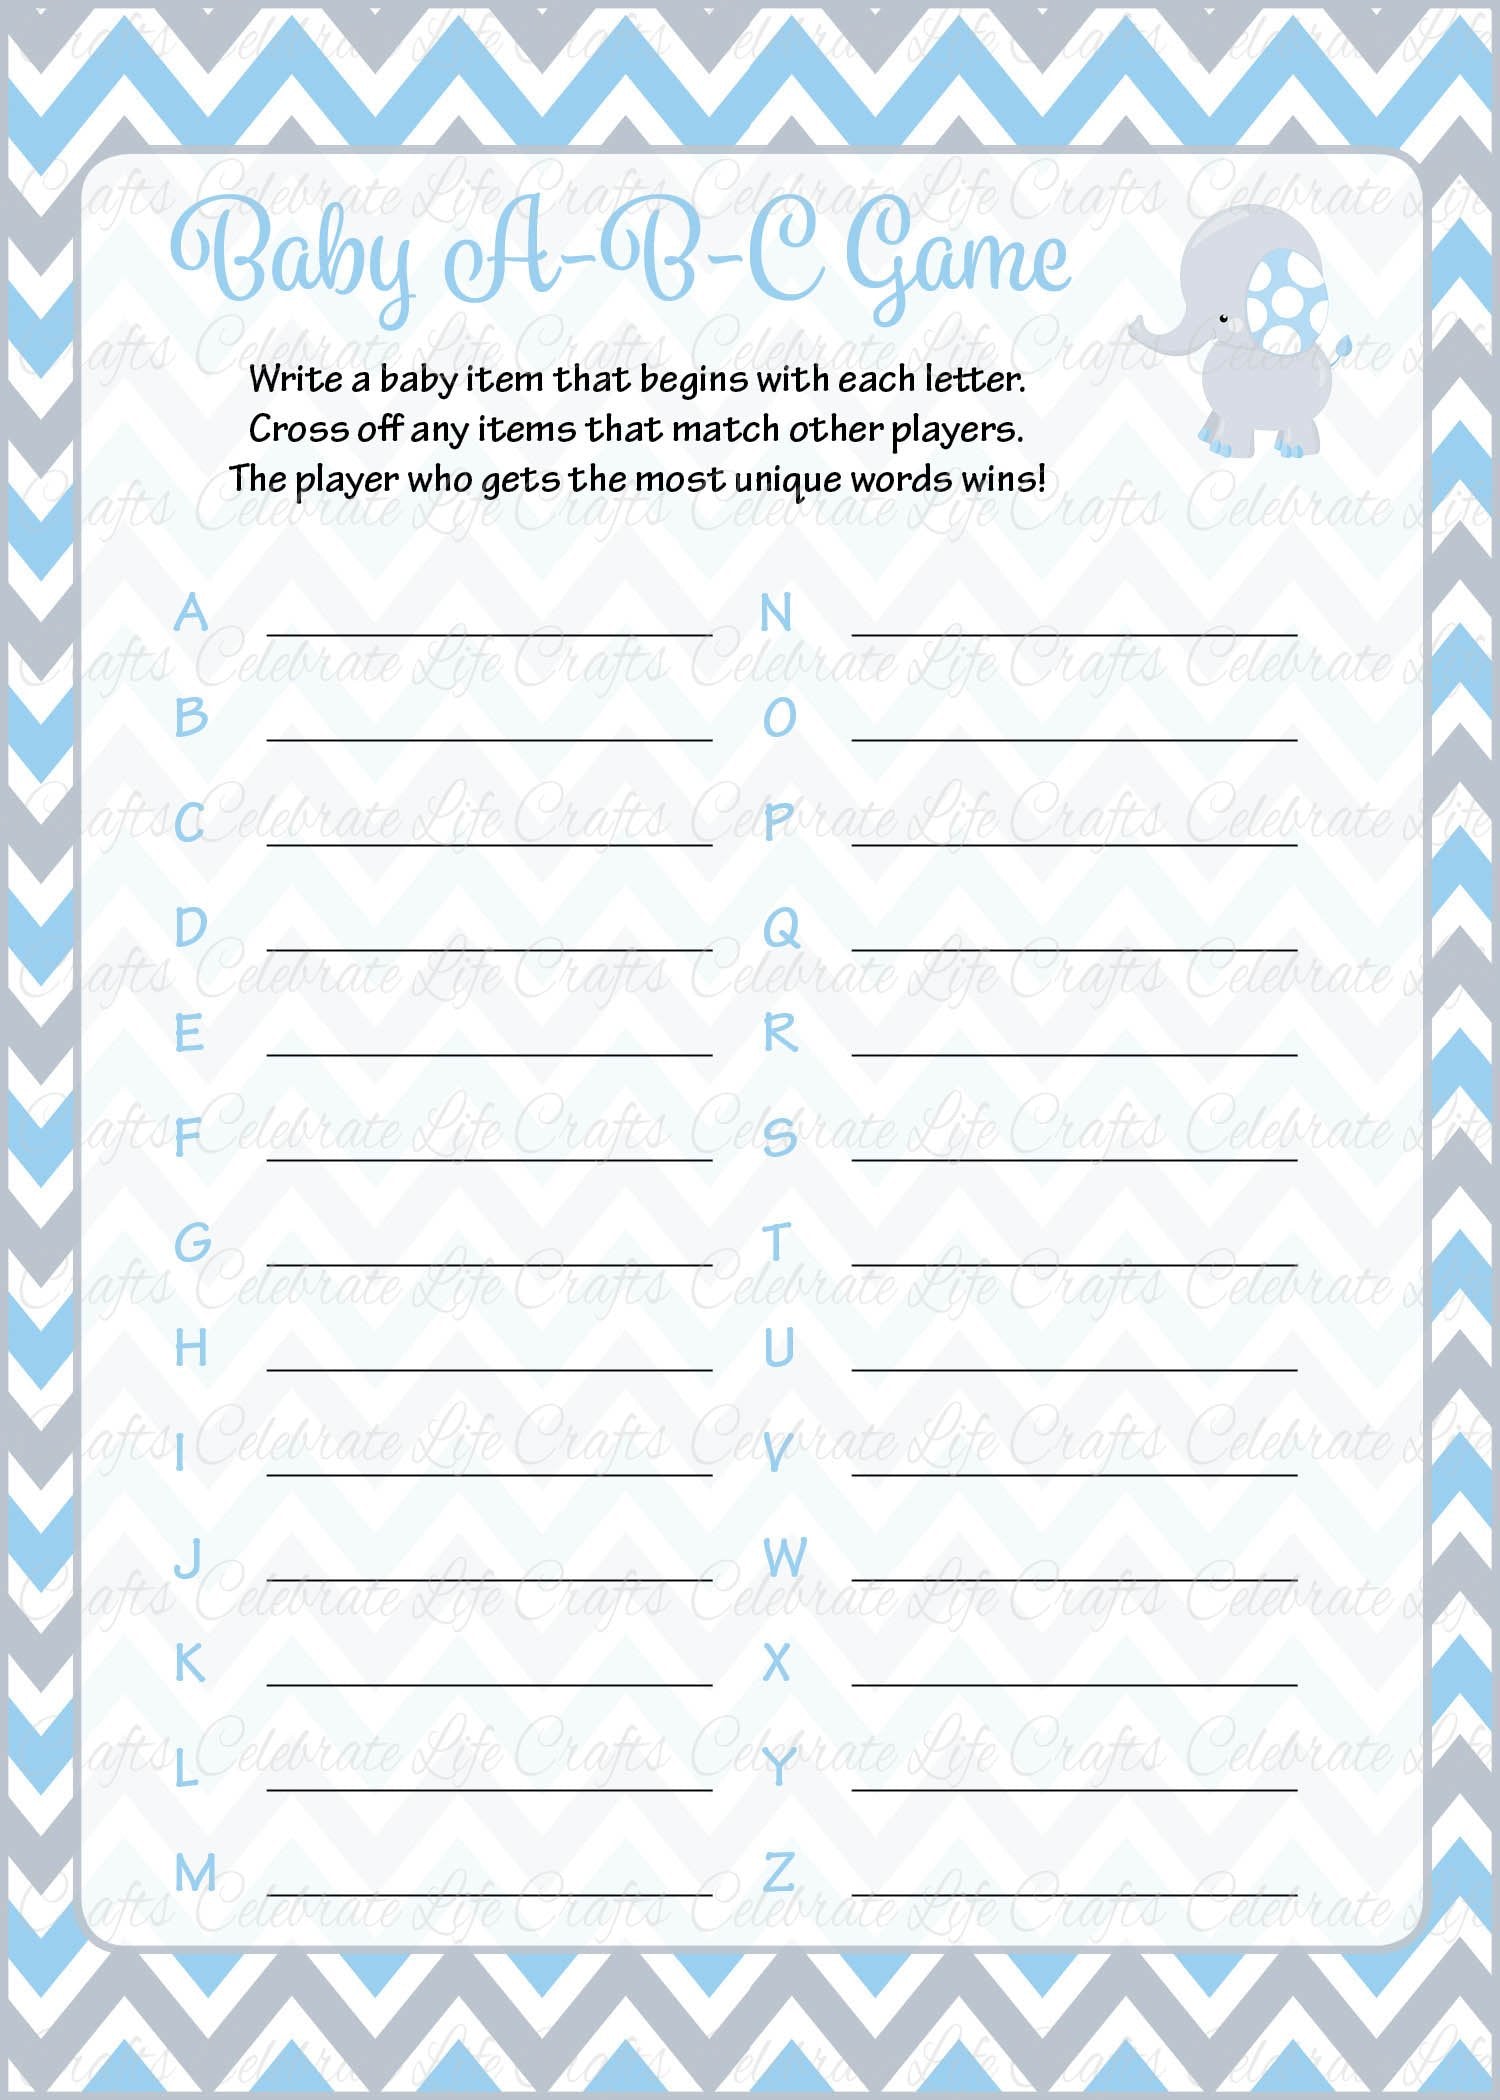 baby-abc-s-baby-shower-game-elephant-baby-shower-theme-for-baby-boy